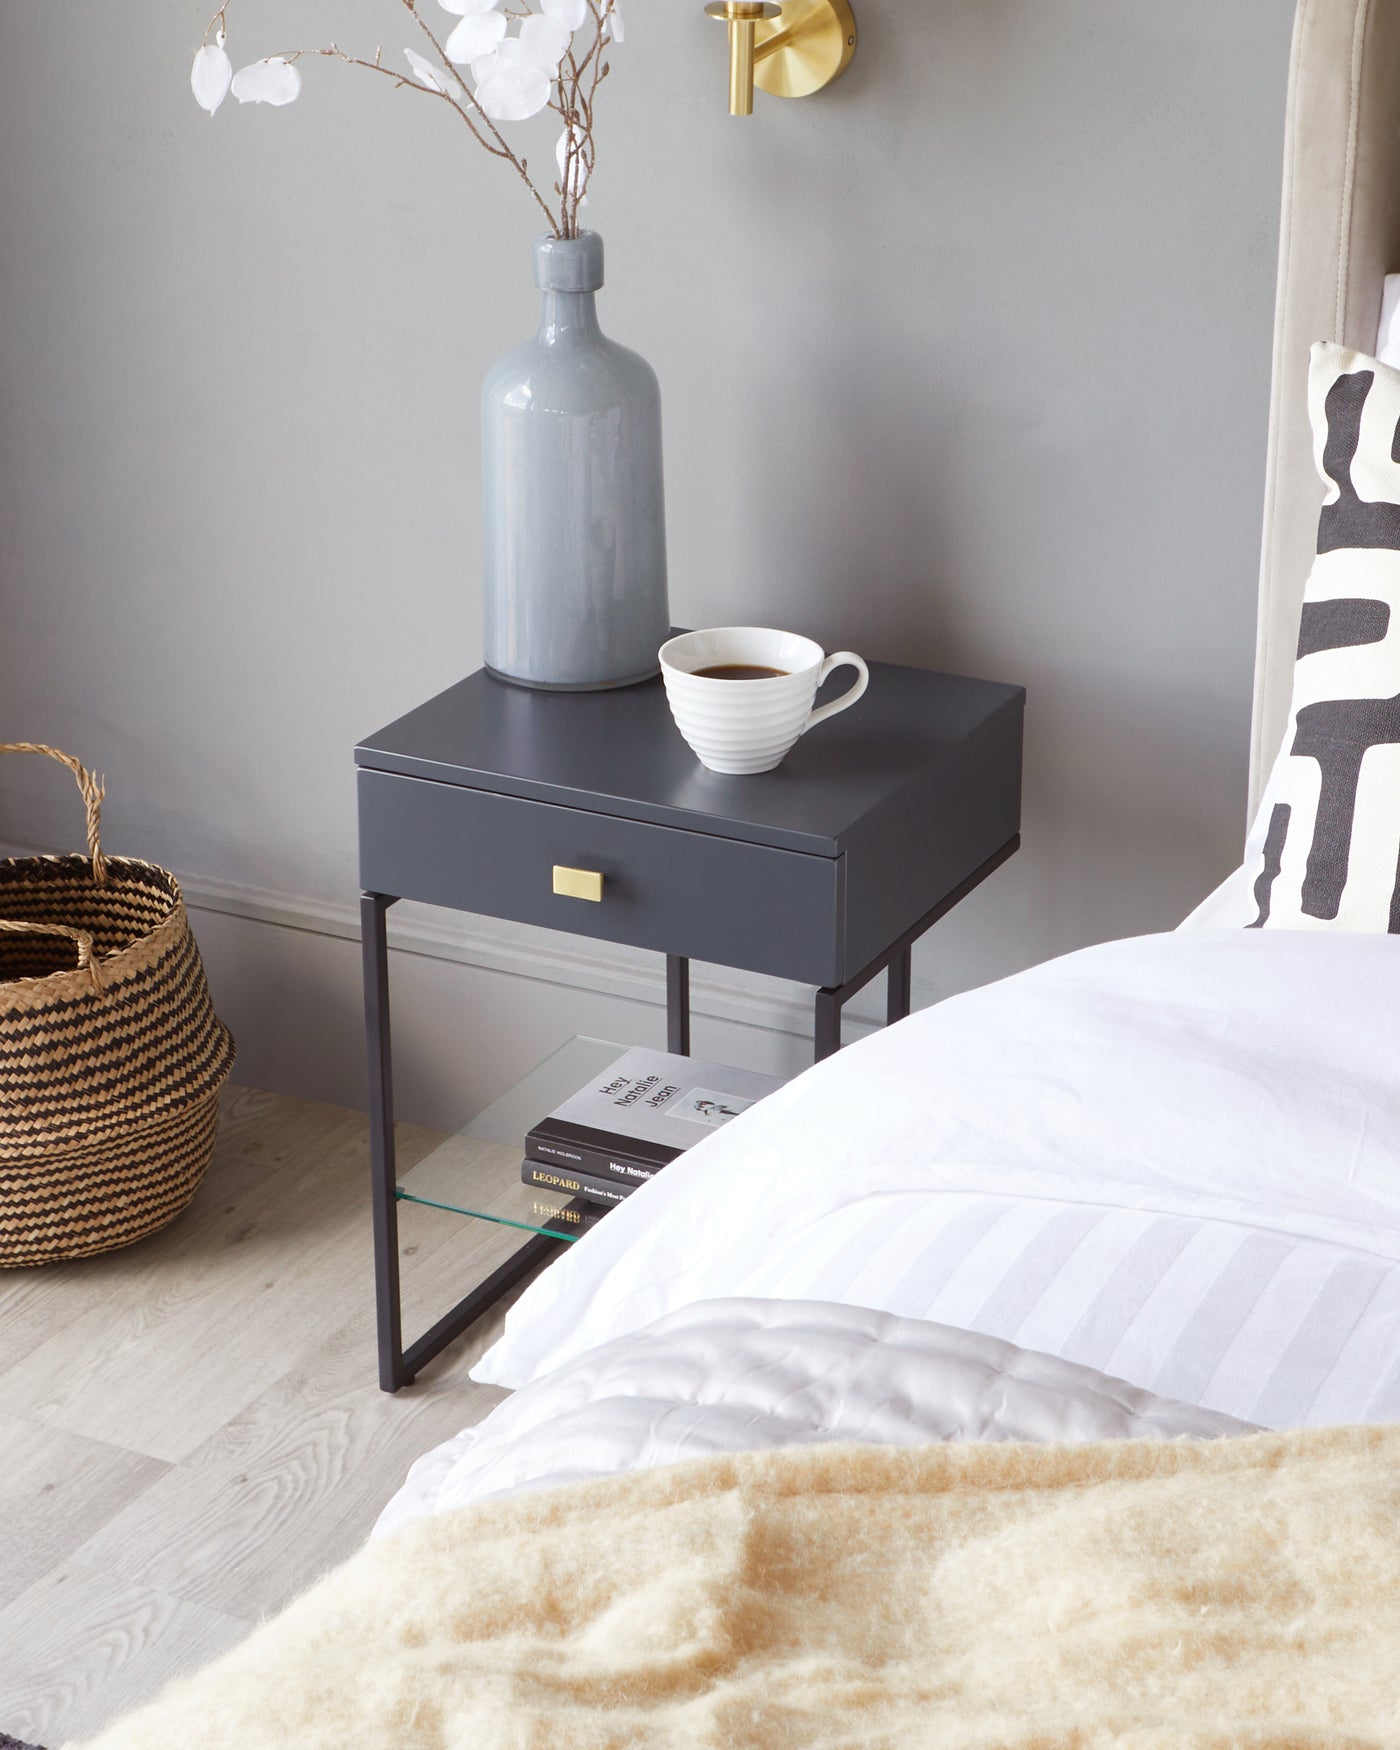 Modern dark grey bedside table with brass pull and lower glass shelf, beside a bed with neutral bedding.